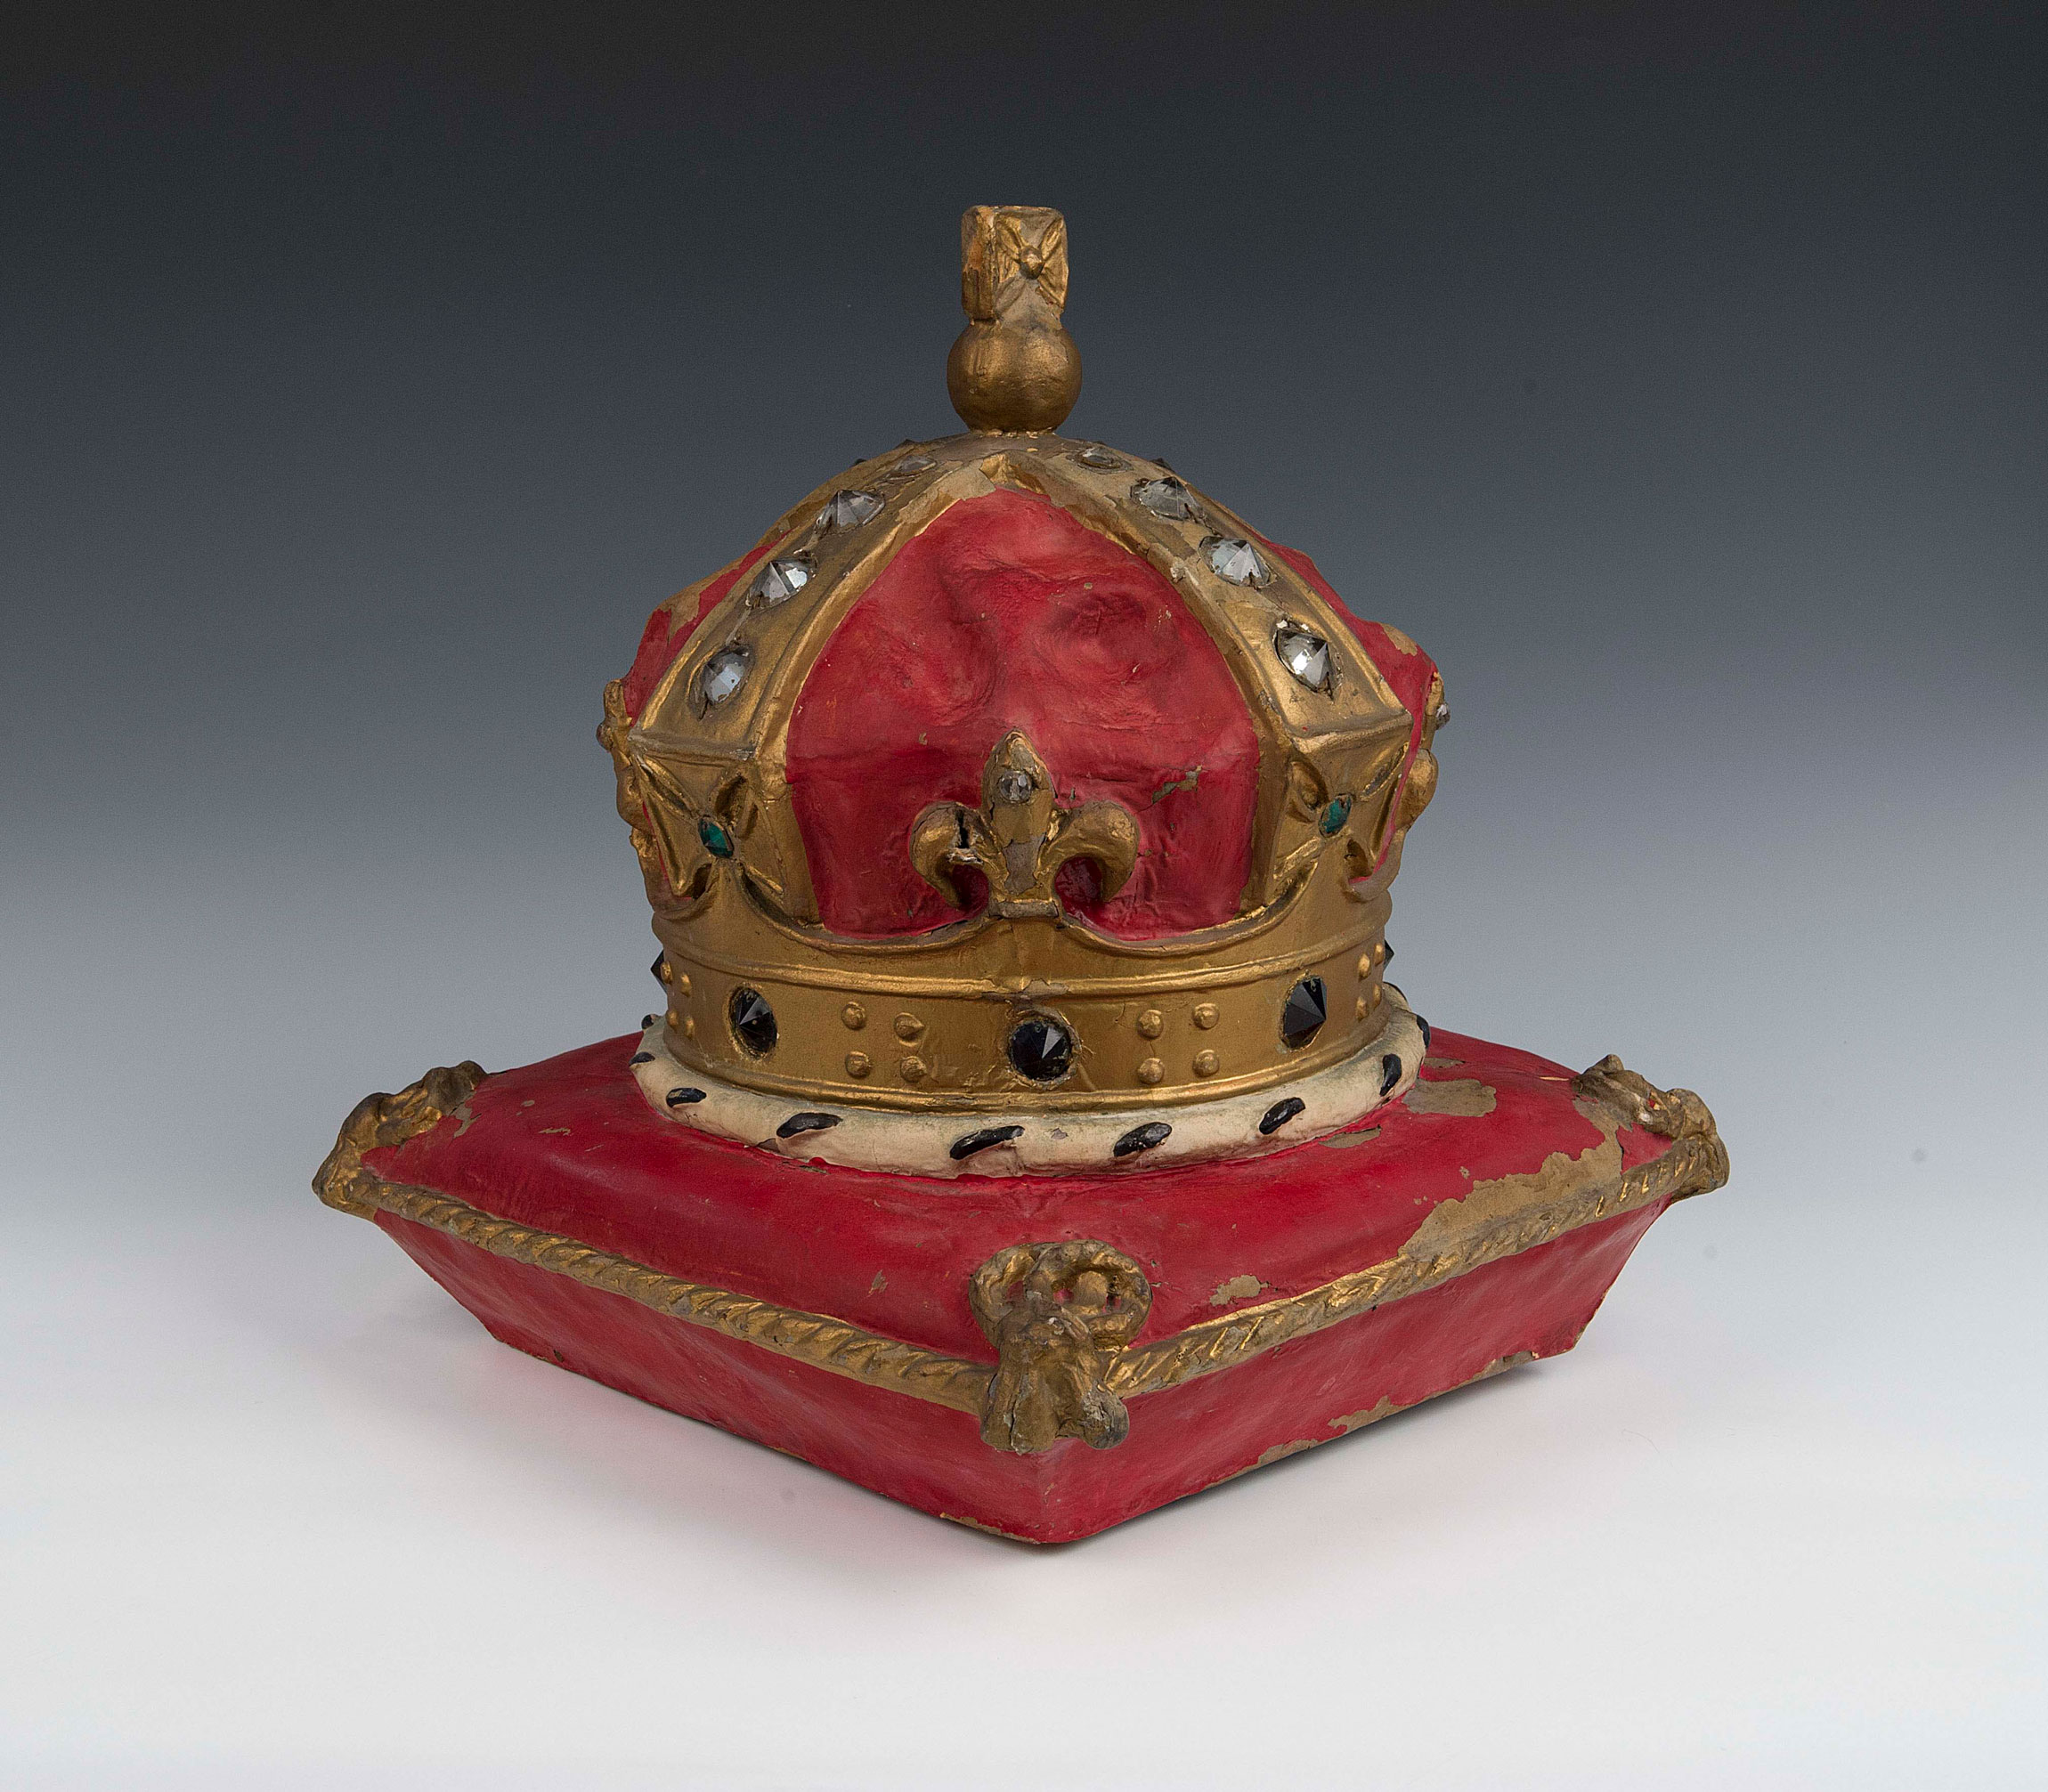 A painted model of a gold crown sitting on a red cushion that has golden tassels. The jewels on the crown are made of glass, which shine when the model is lit up from the inside. 